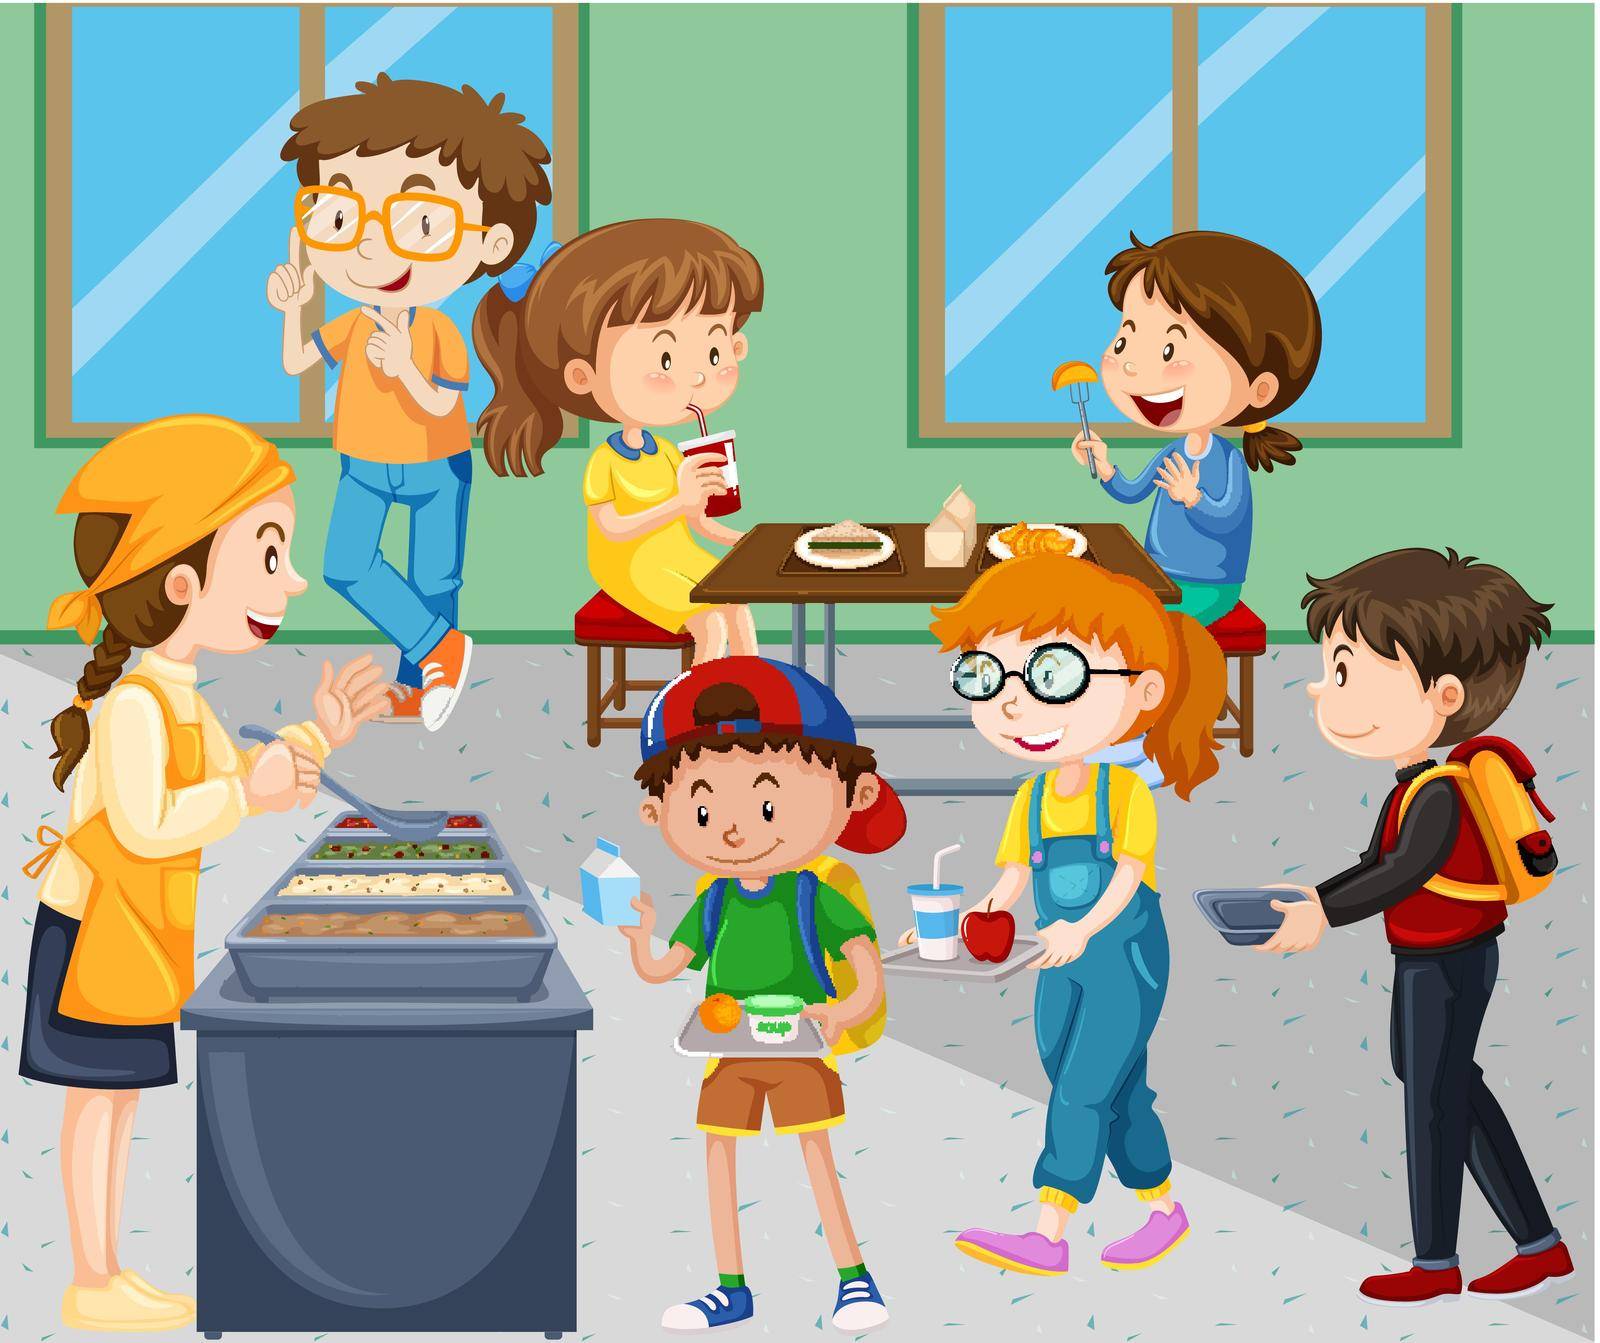 Children eating lunch in cafeteria by iimages